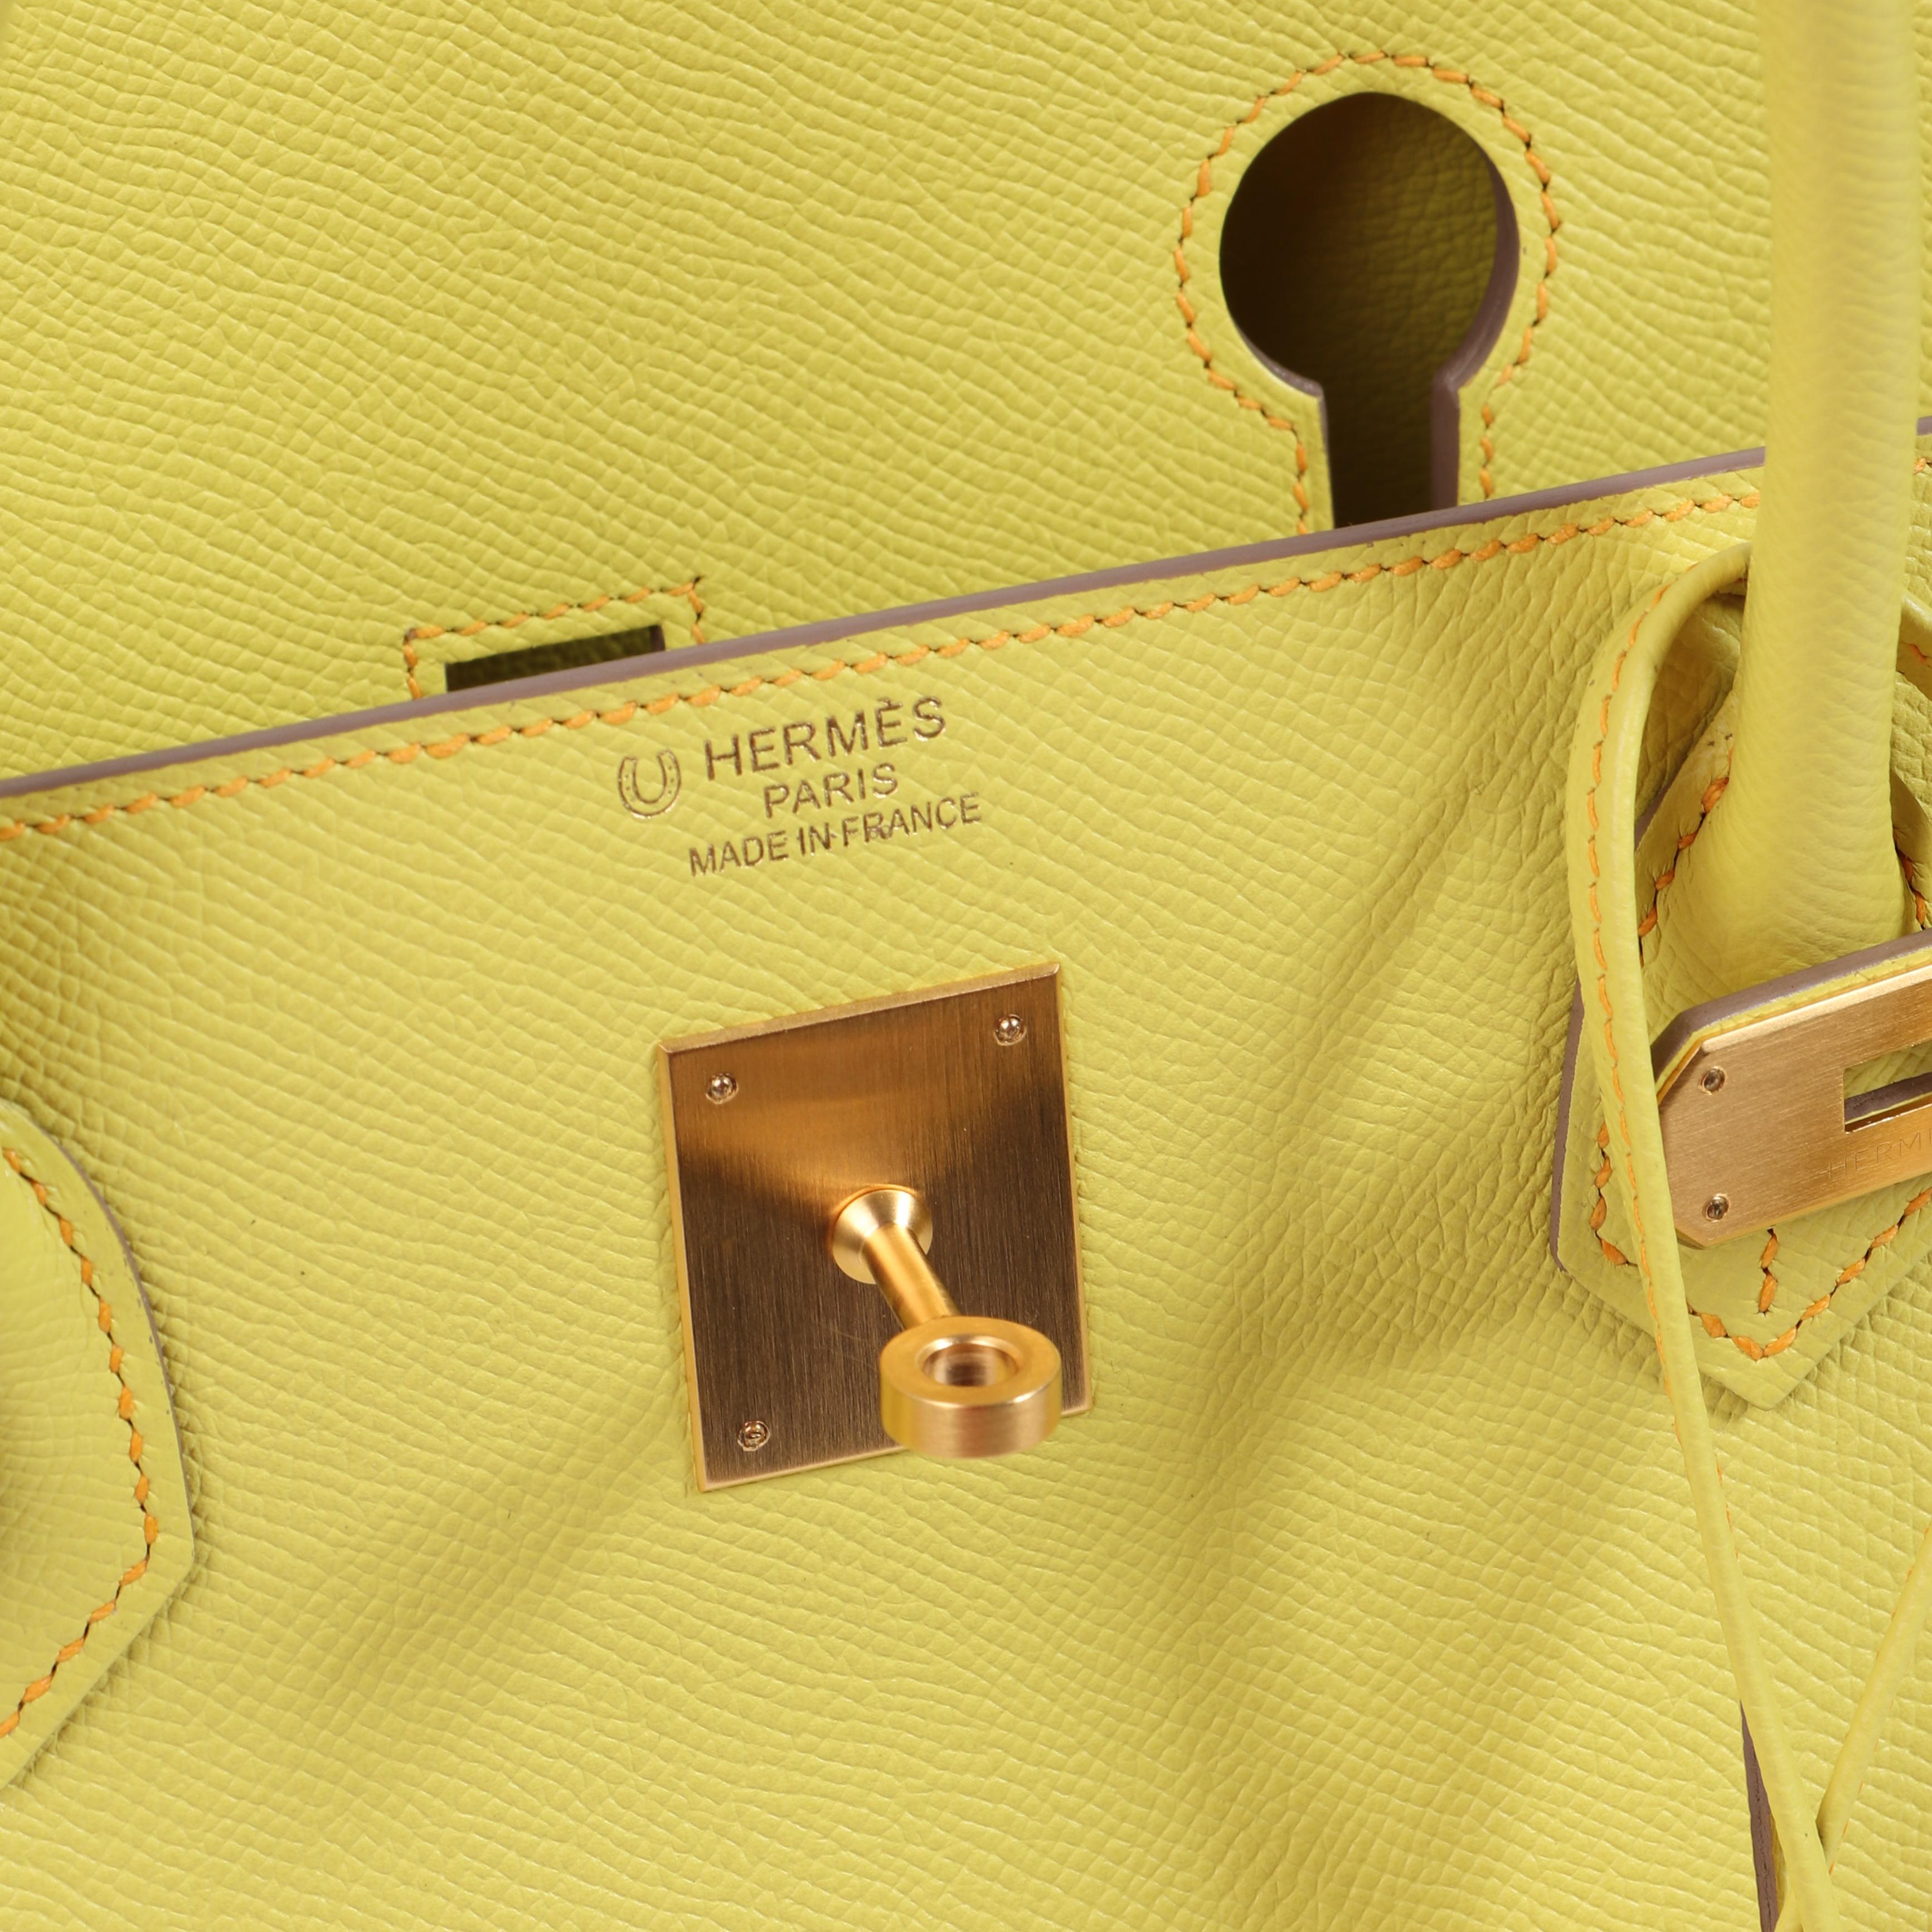 Hermès HSS Birkin 40 Lime & Abricot Epsom Brushed Gold Hardware

This Hermès Horseshoe Birkin 40 a true collector's item. Special Ordered from Hermès, the bag is in eye-catching Lime yellow with Apricot stitching.

Exclusive and store-fresh, it is